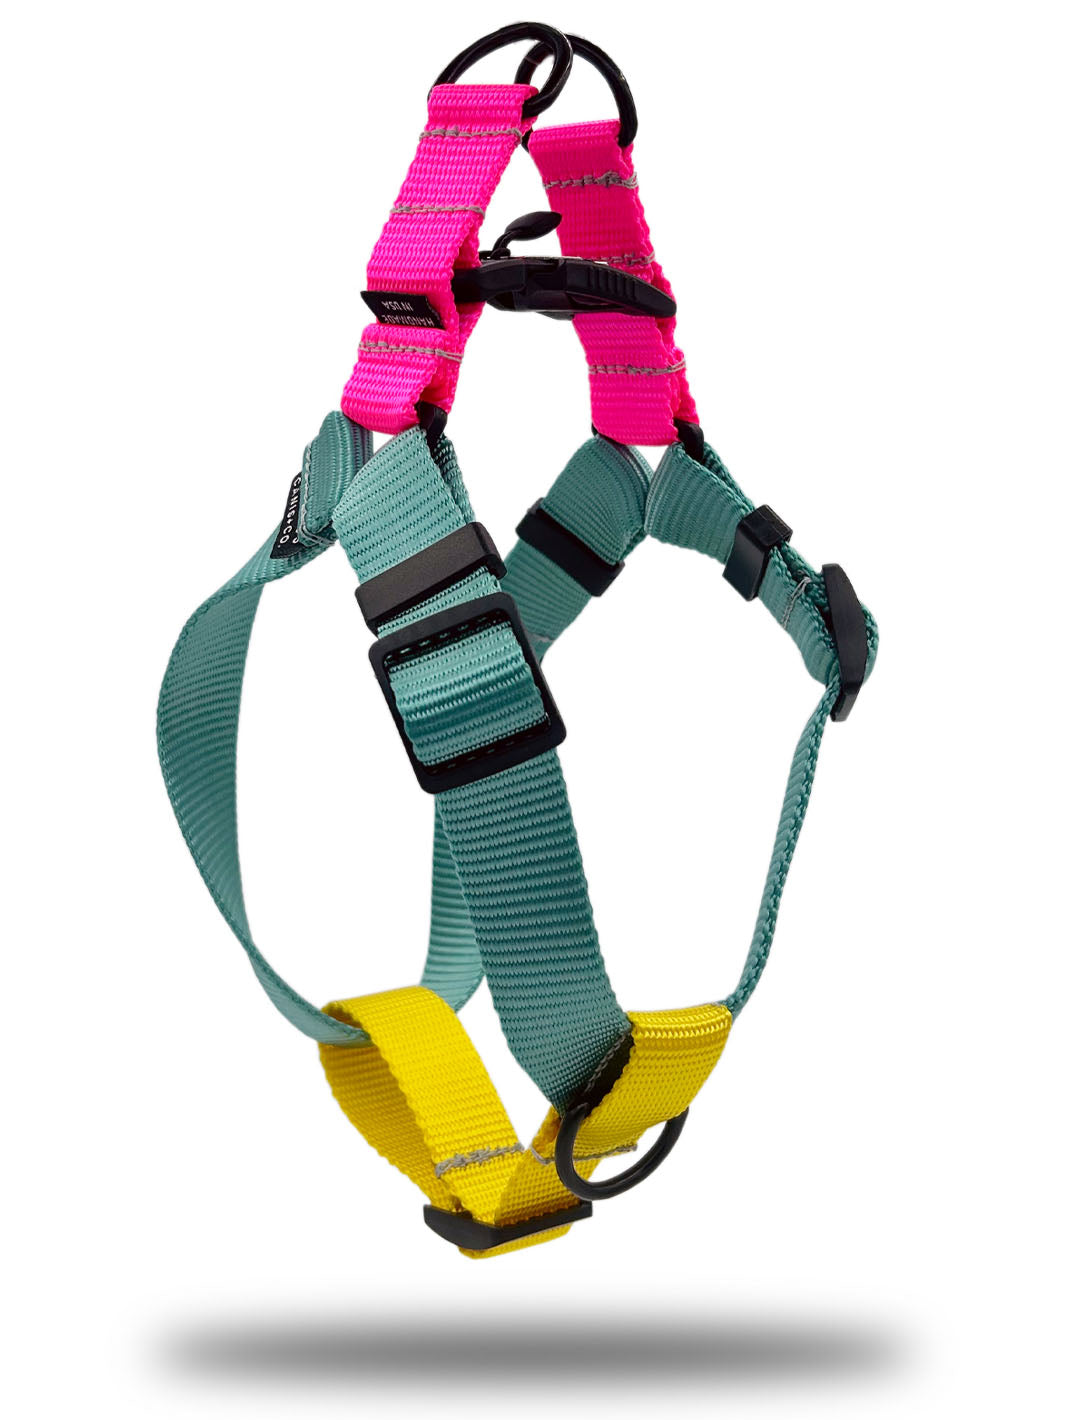 MAGNUS Canis french bulldog harness in light teal hot pink and yellow strap webbing.